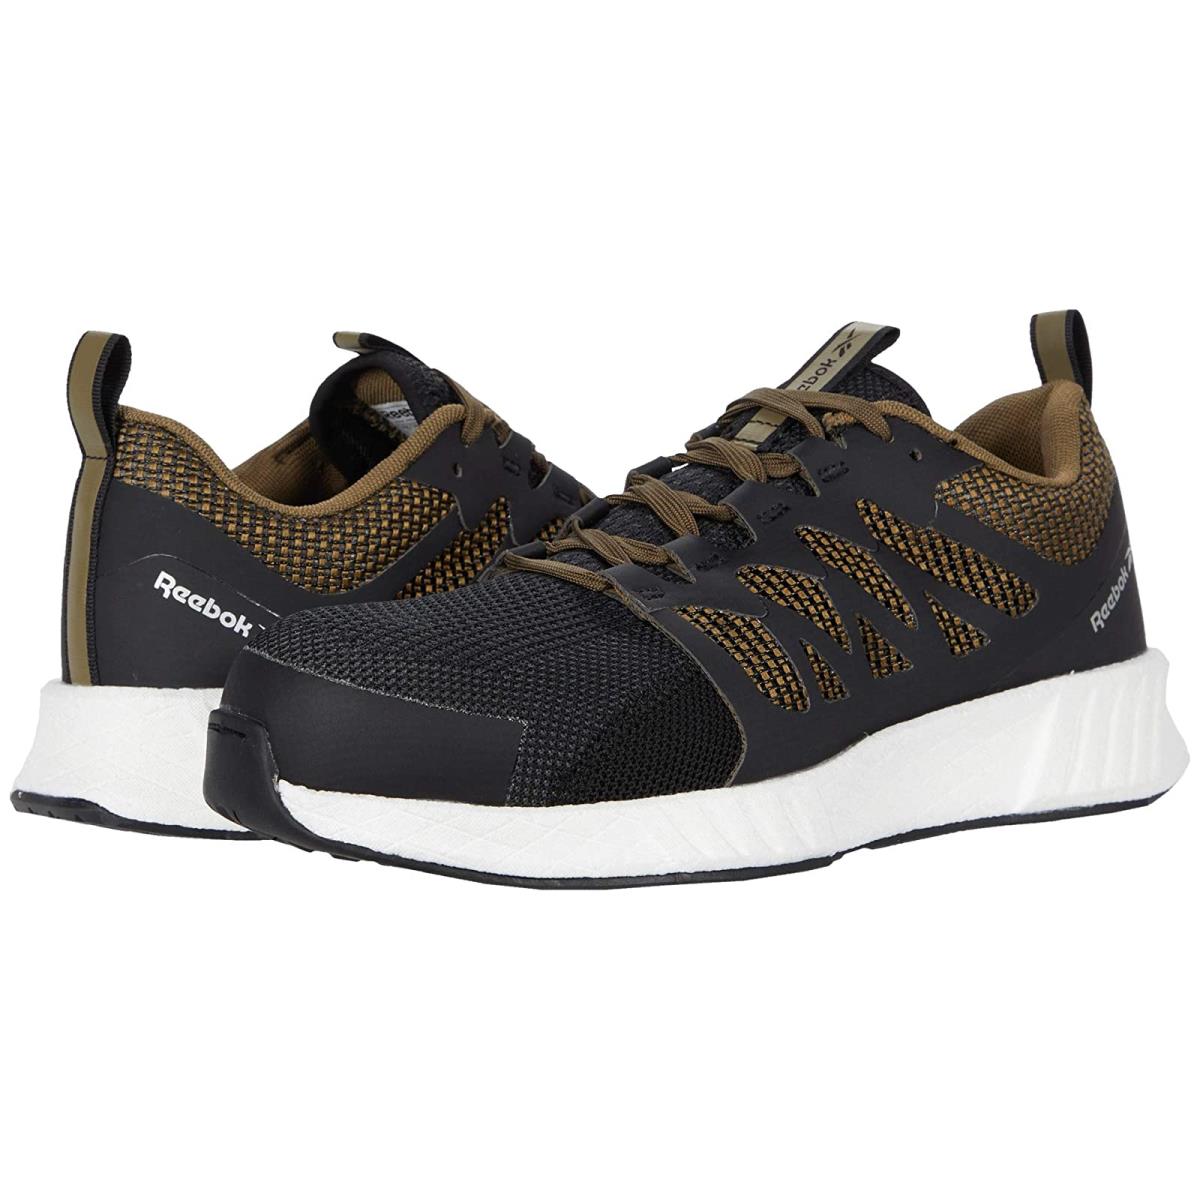 Man`s Shoes Reebok Work Fusion Flexweave Cage Composite Toe Brown